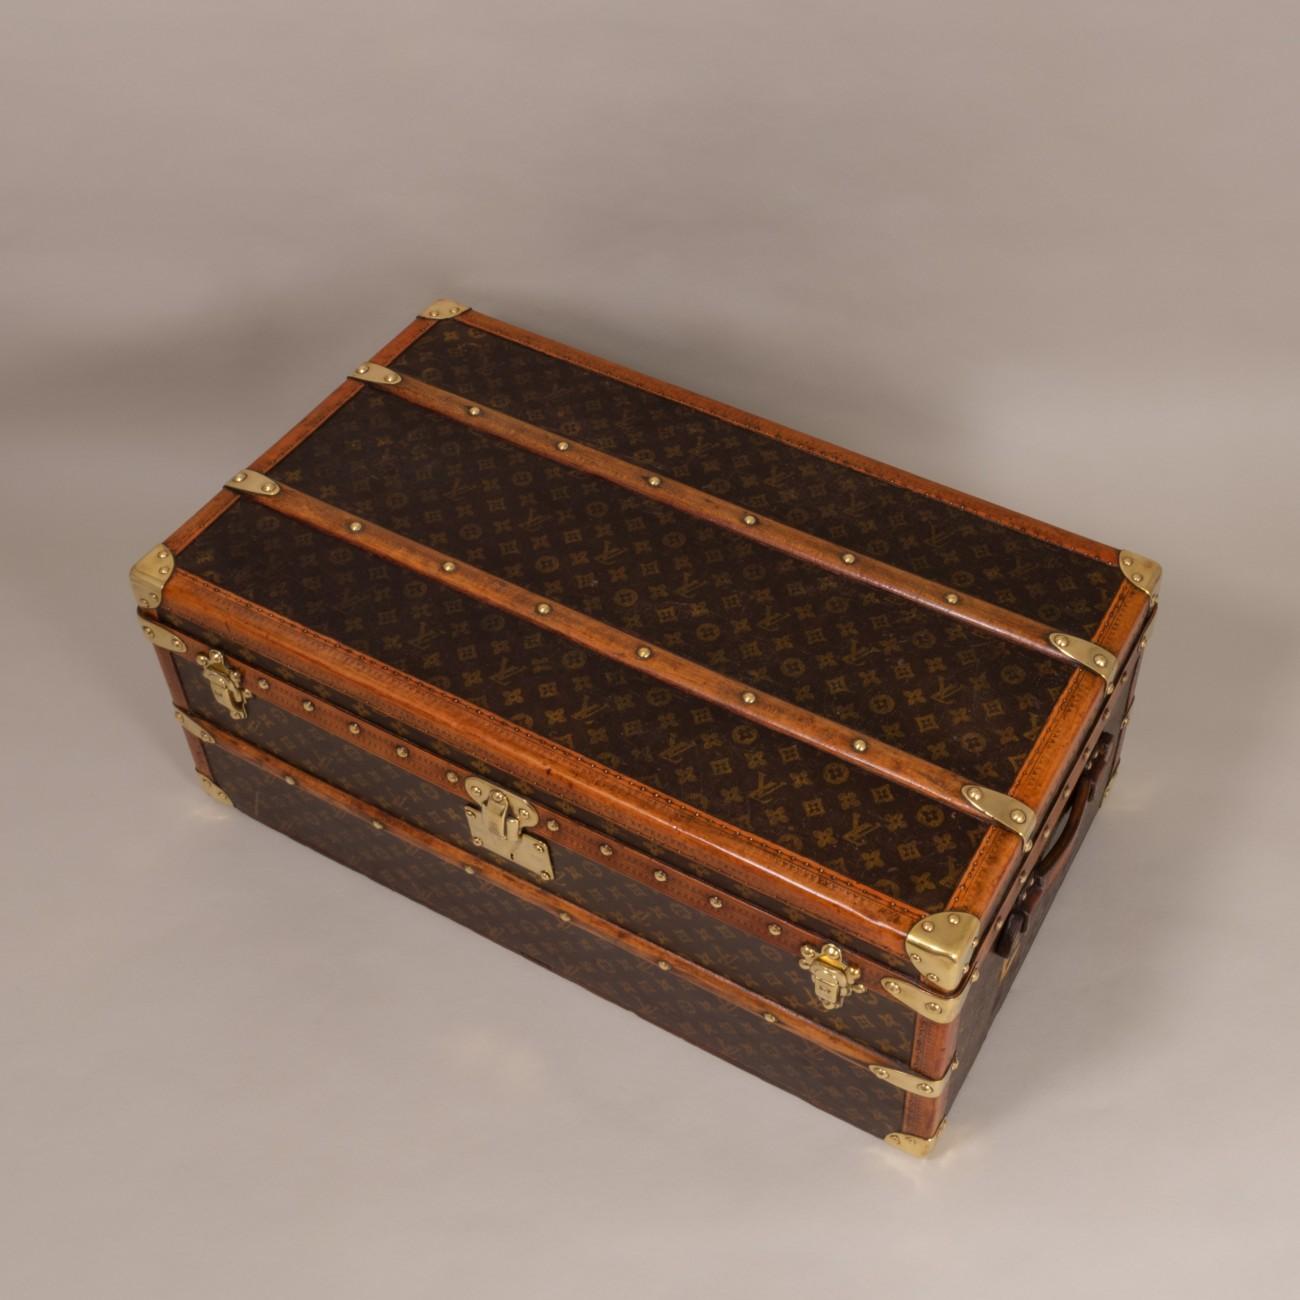 A splendid aero trunk with polished brass fittings, lozine trim and original interior with tray, circa 1915. The leather handles on this trunk are replacements, made as copies of the originals.

Dimensions: 80.5cm/31¾ inches (length) x 46.5cm/18¼